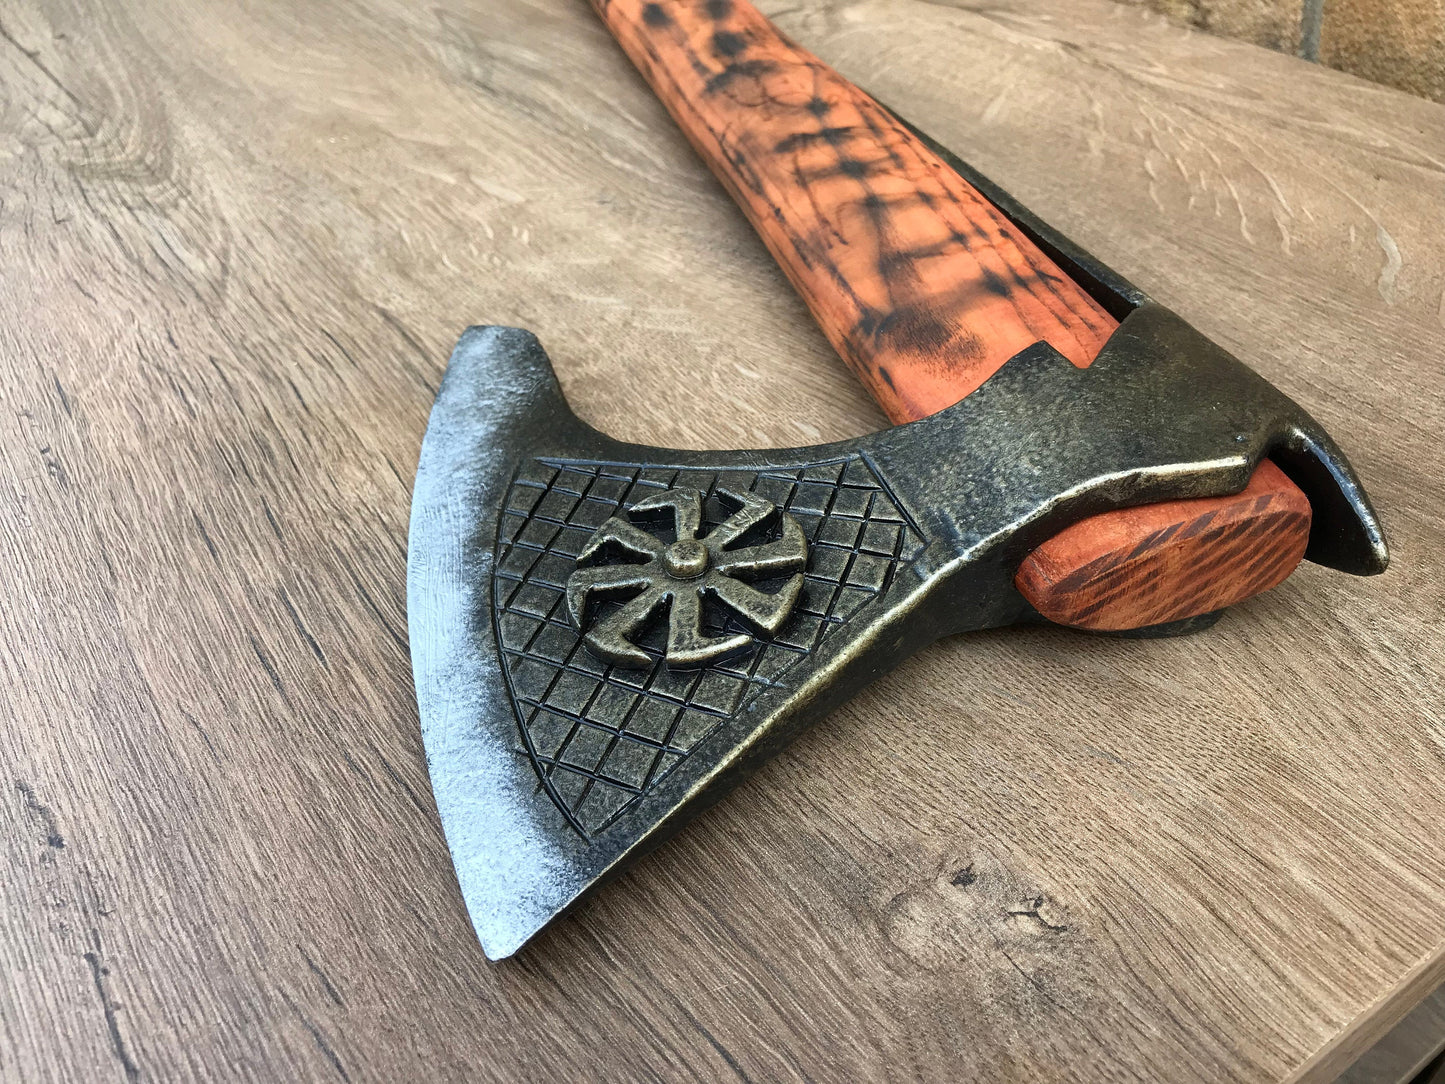 Medieval axe, decorative axe, viking axe, hand forged axe, tomahawk, hatchet, mens gifts, medieval armor, axe gift, viking gifts, mens armor